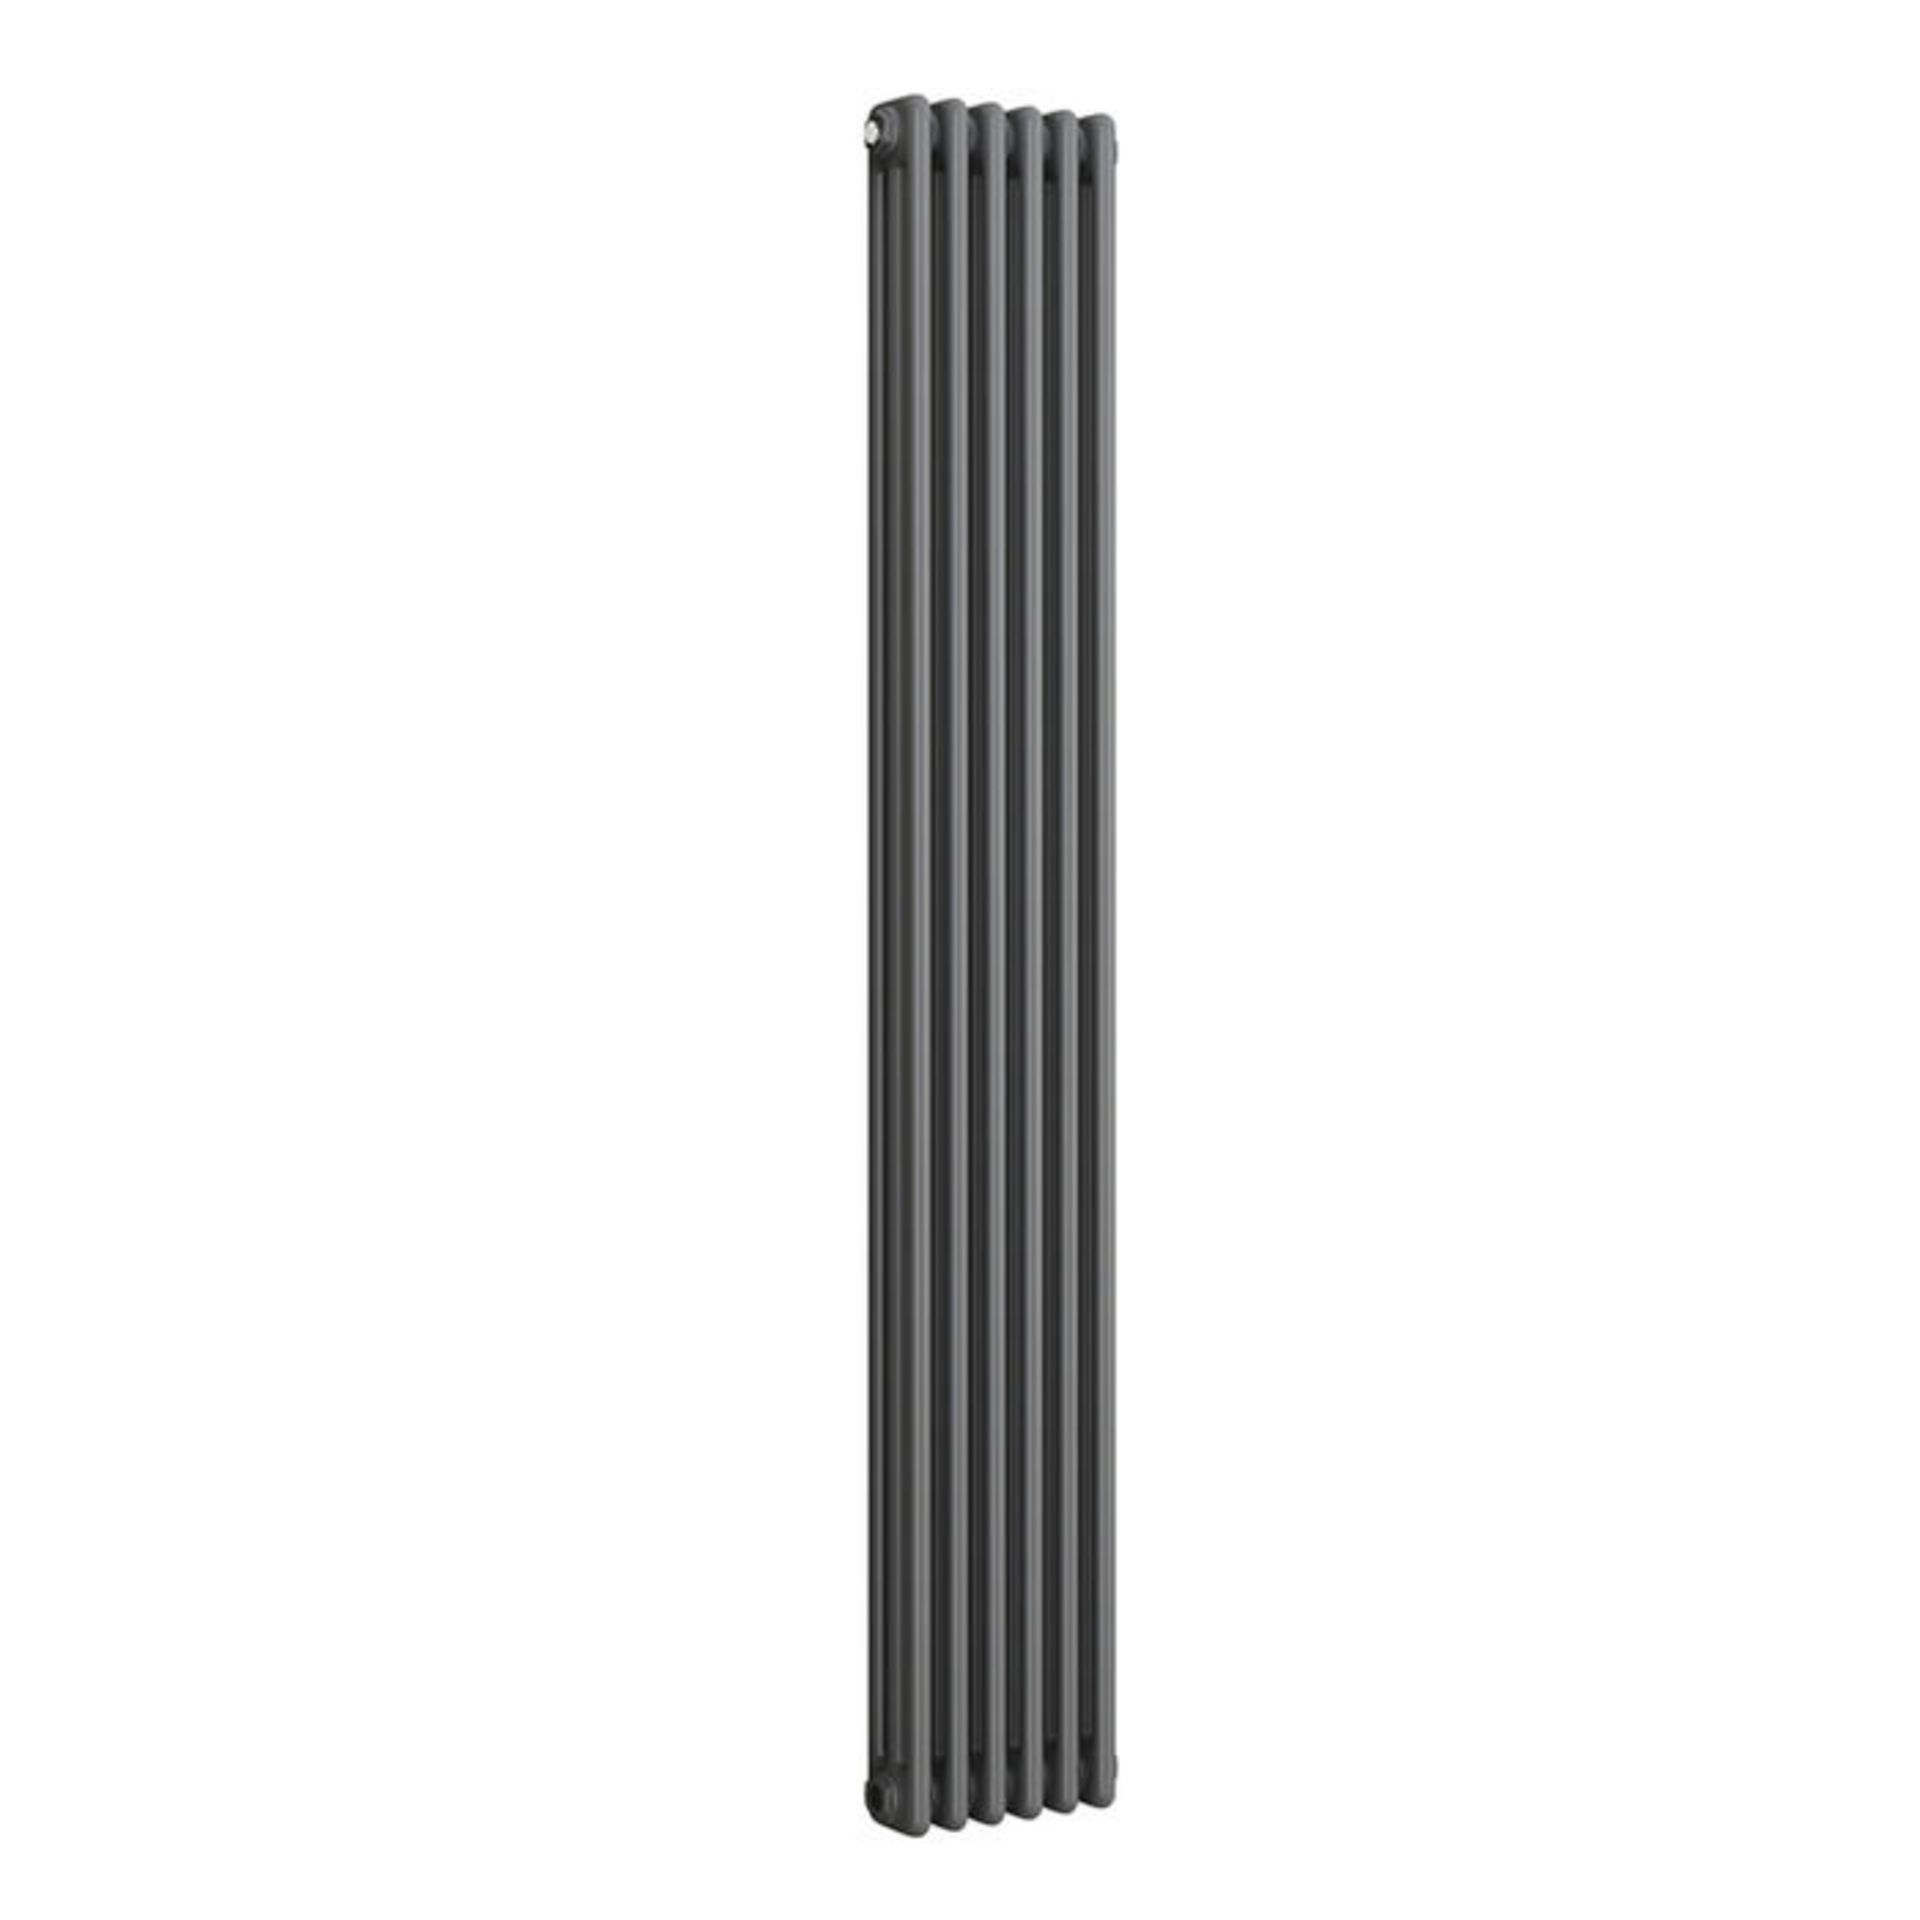 (DK128) 1800x290mm Anthracite Triple Panel Vertical Colosseum Traditional Radiator. RRP £430.99. - Image 3 of 4